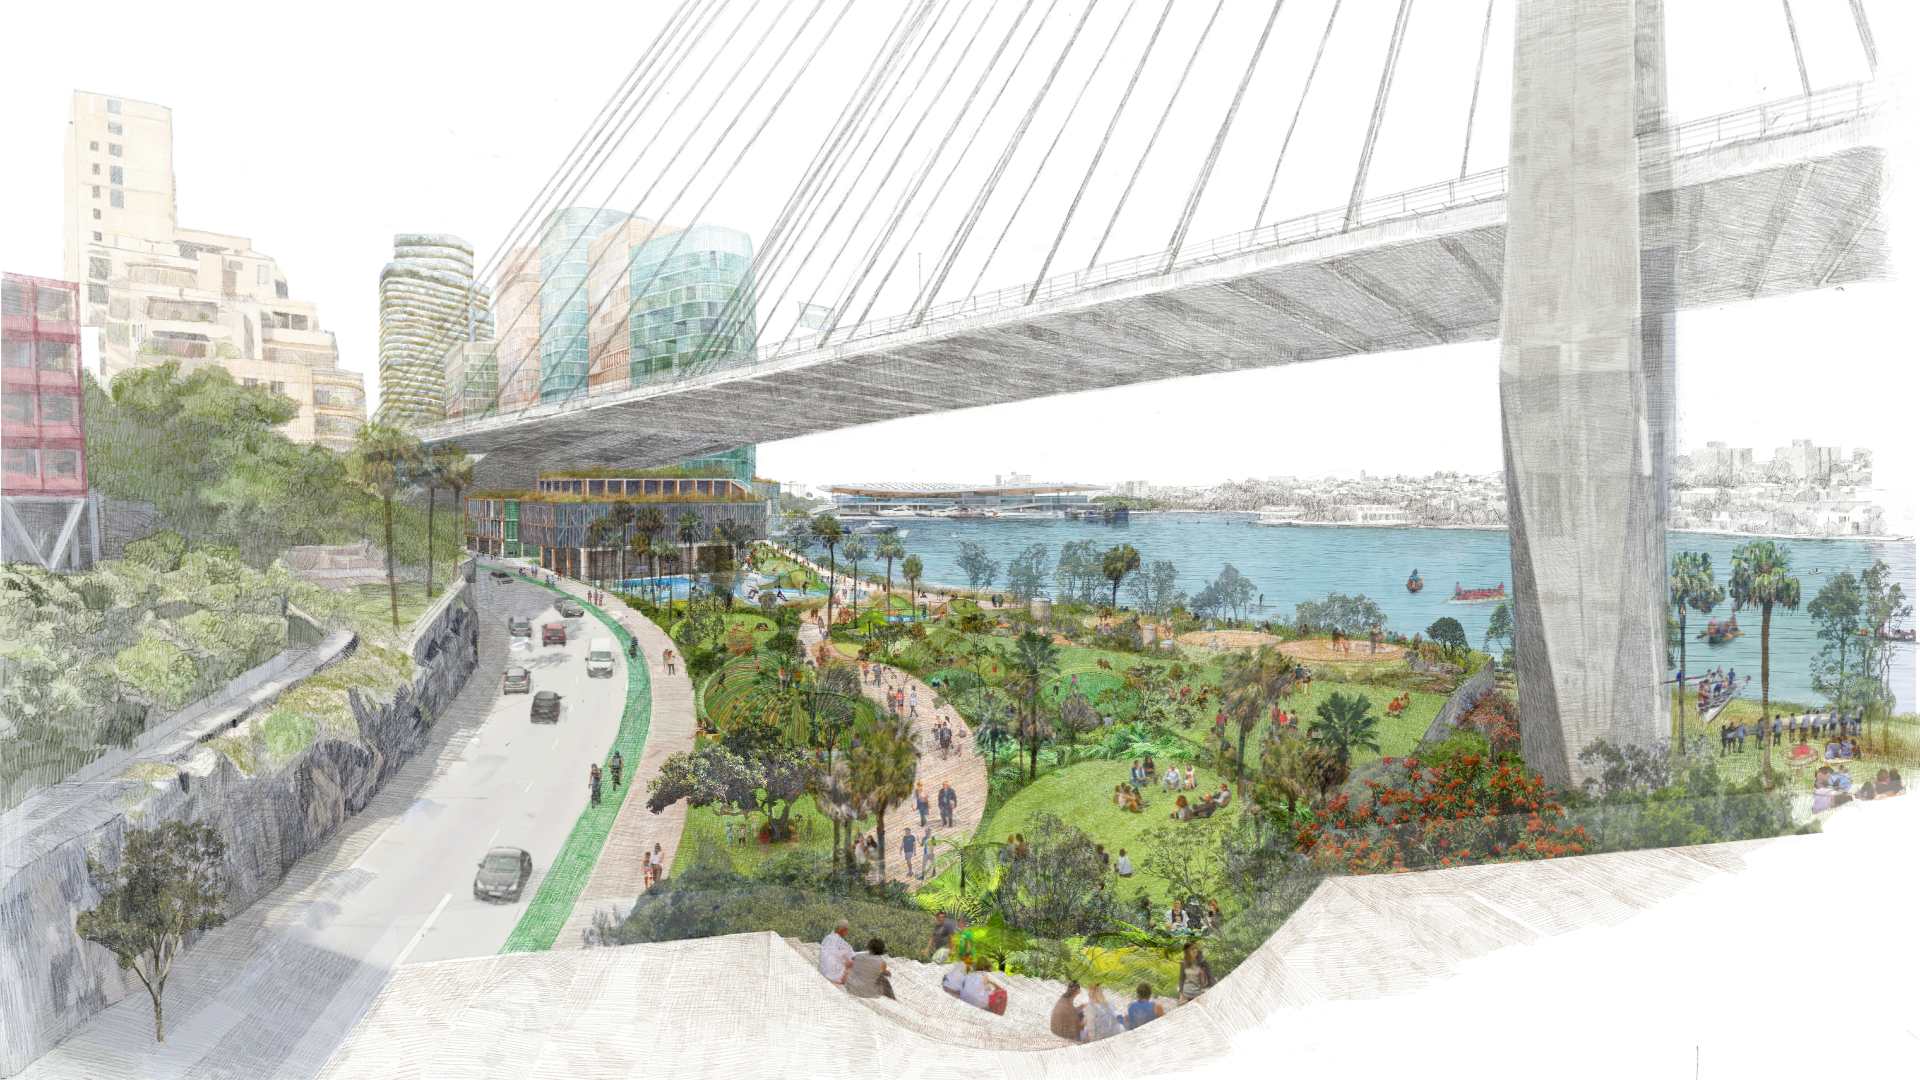 Plans for the Soon-to-be-Former Sydney Fish Market Site Have Been Unveiled